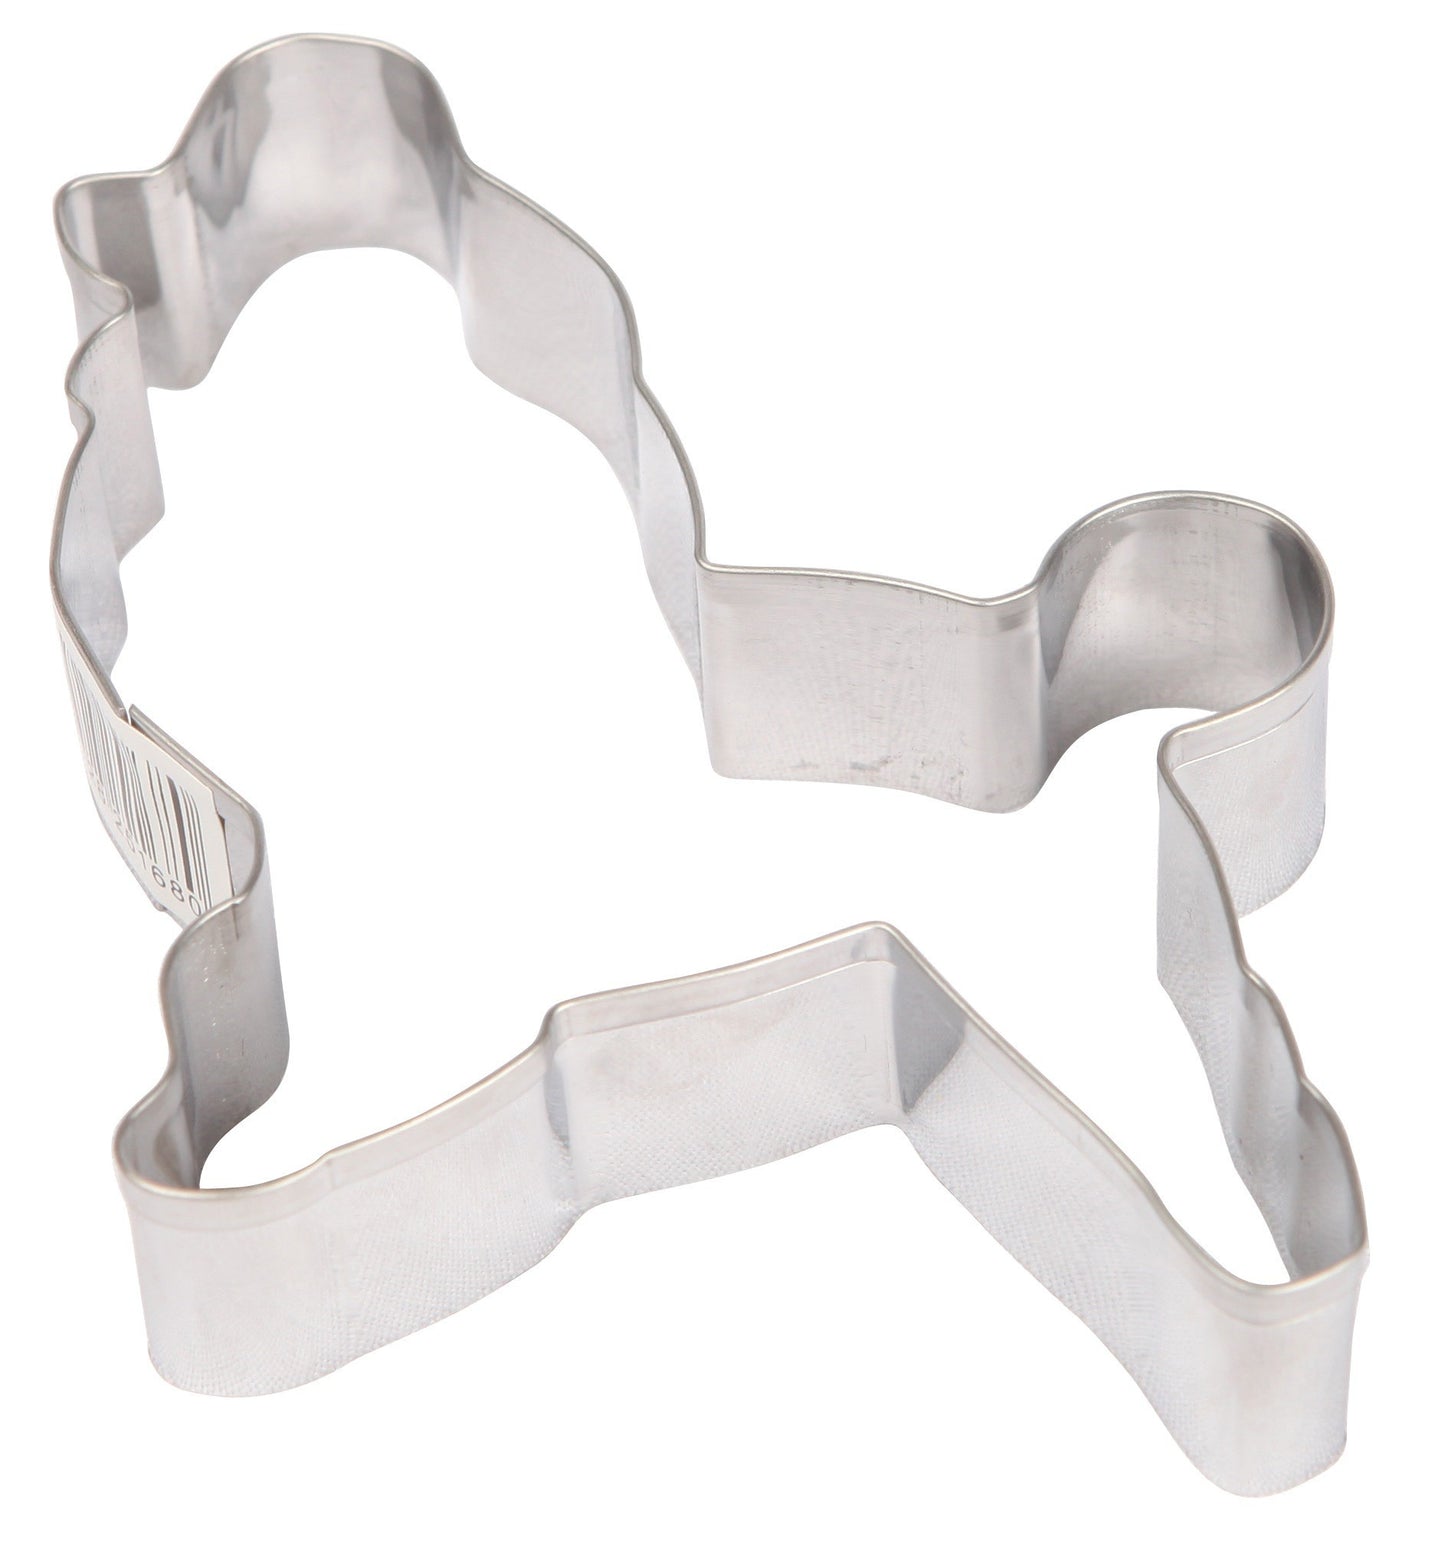 Poodle stainless steel cookie cutter